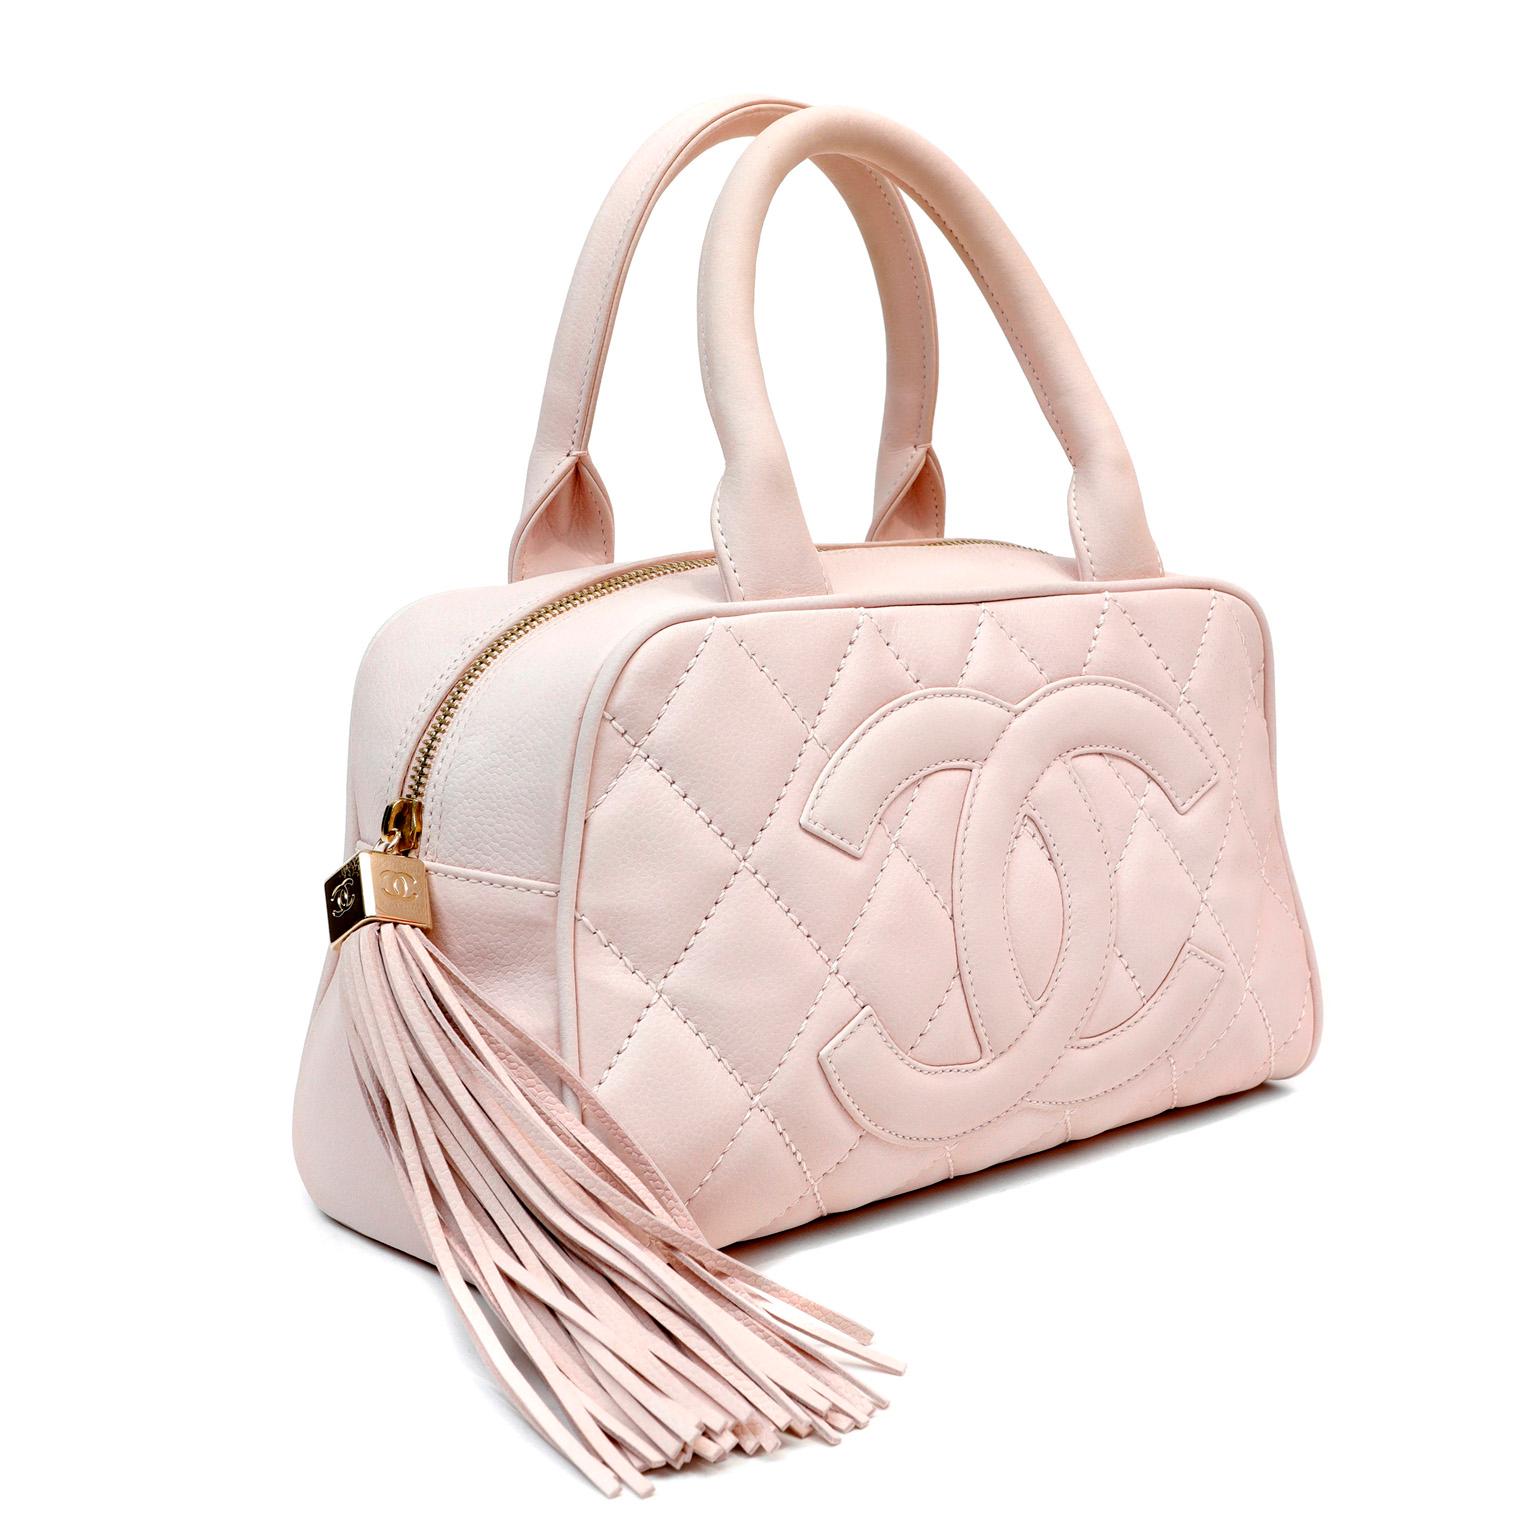 This authentic Chanel Pink Brushed Caviar Mini Tote is in excellent plus condition.  Lovely and demure mini silhouette in feminine ballerina pink with an oversized leather tassel accent. Signature Chanel diamond stitched pattern with large